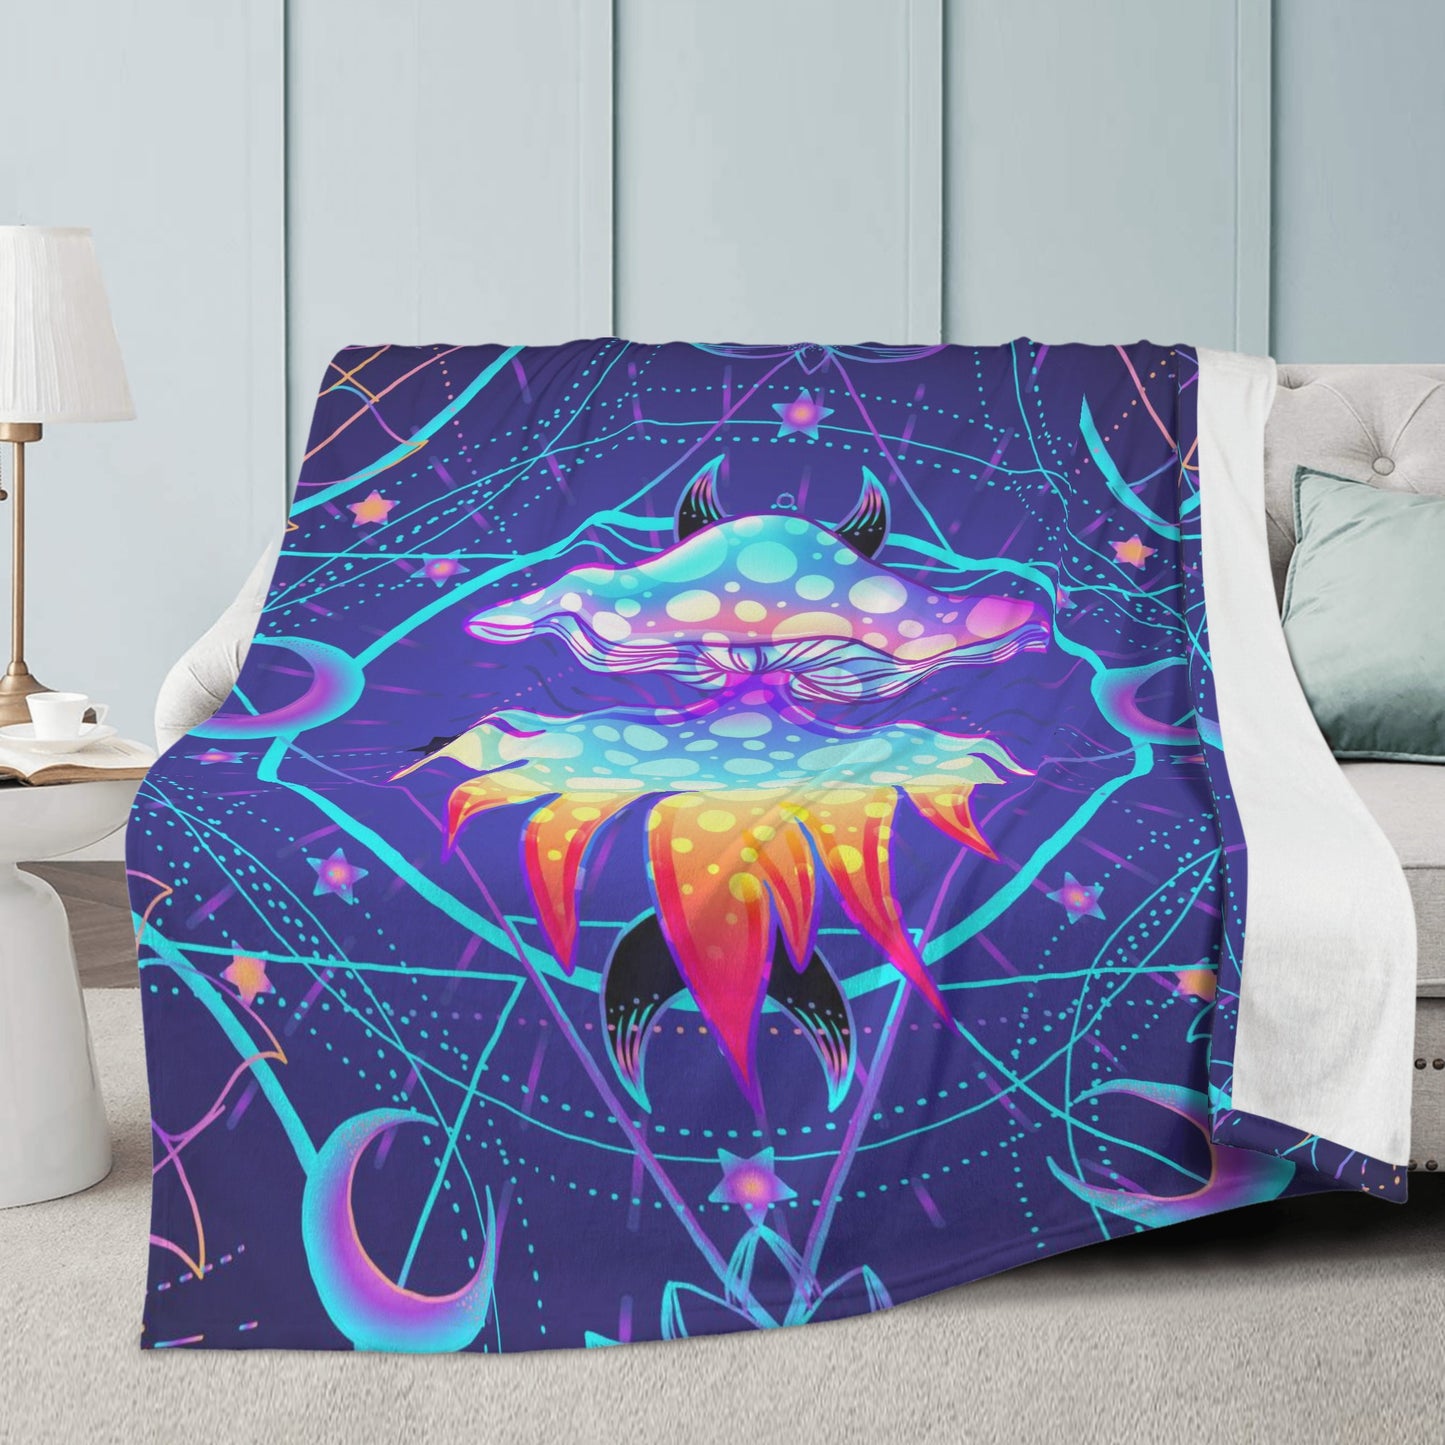 A Celestial Trip With This Psychedelic Mushroom Fleece Blanket